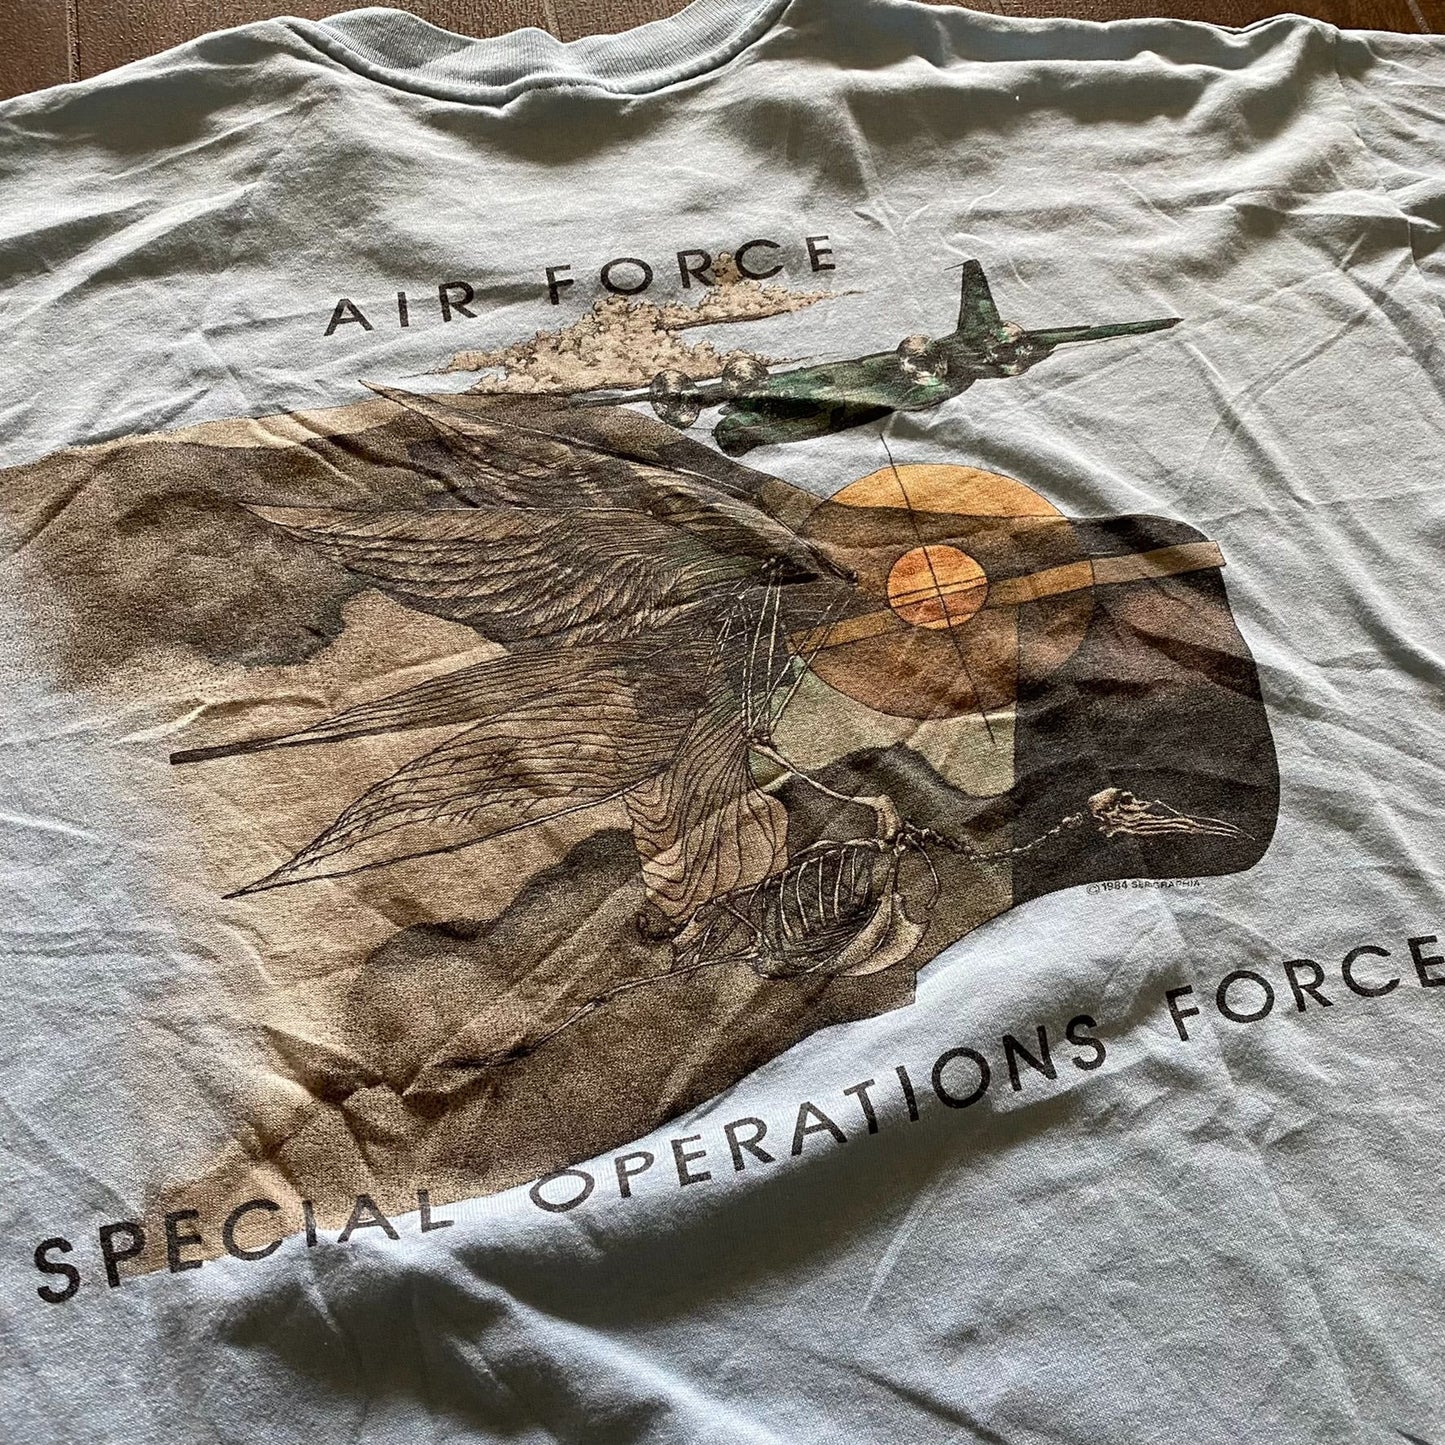 Air Force Special Operations Vintage T-Shirt